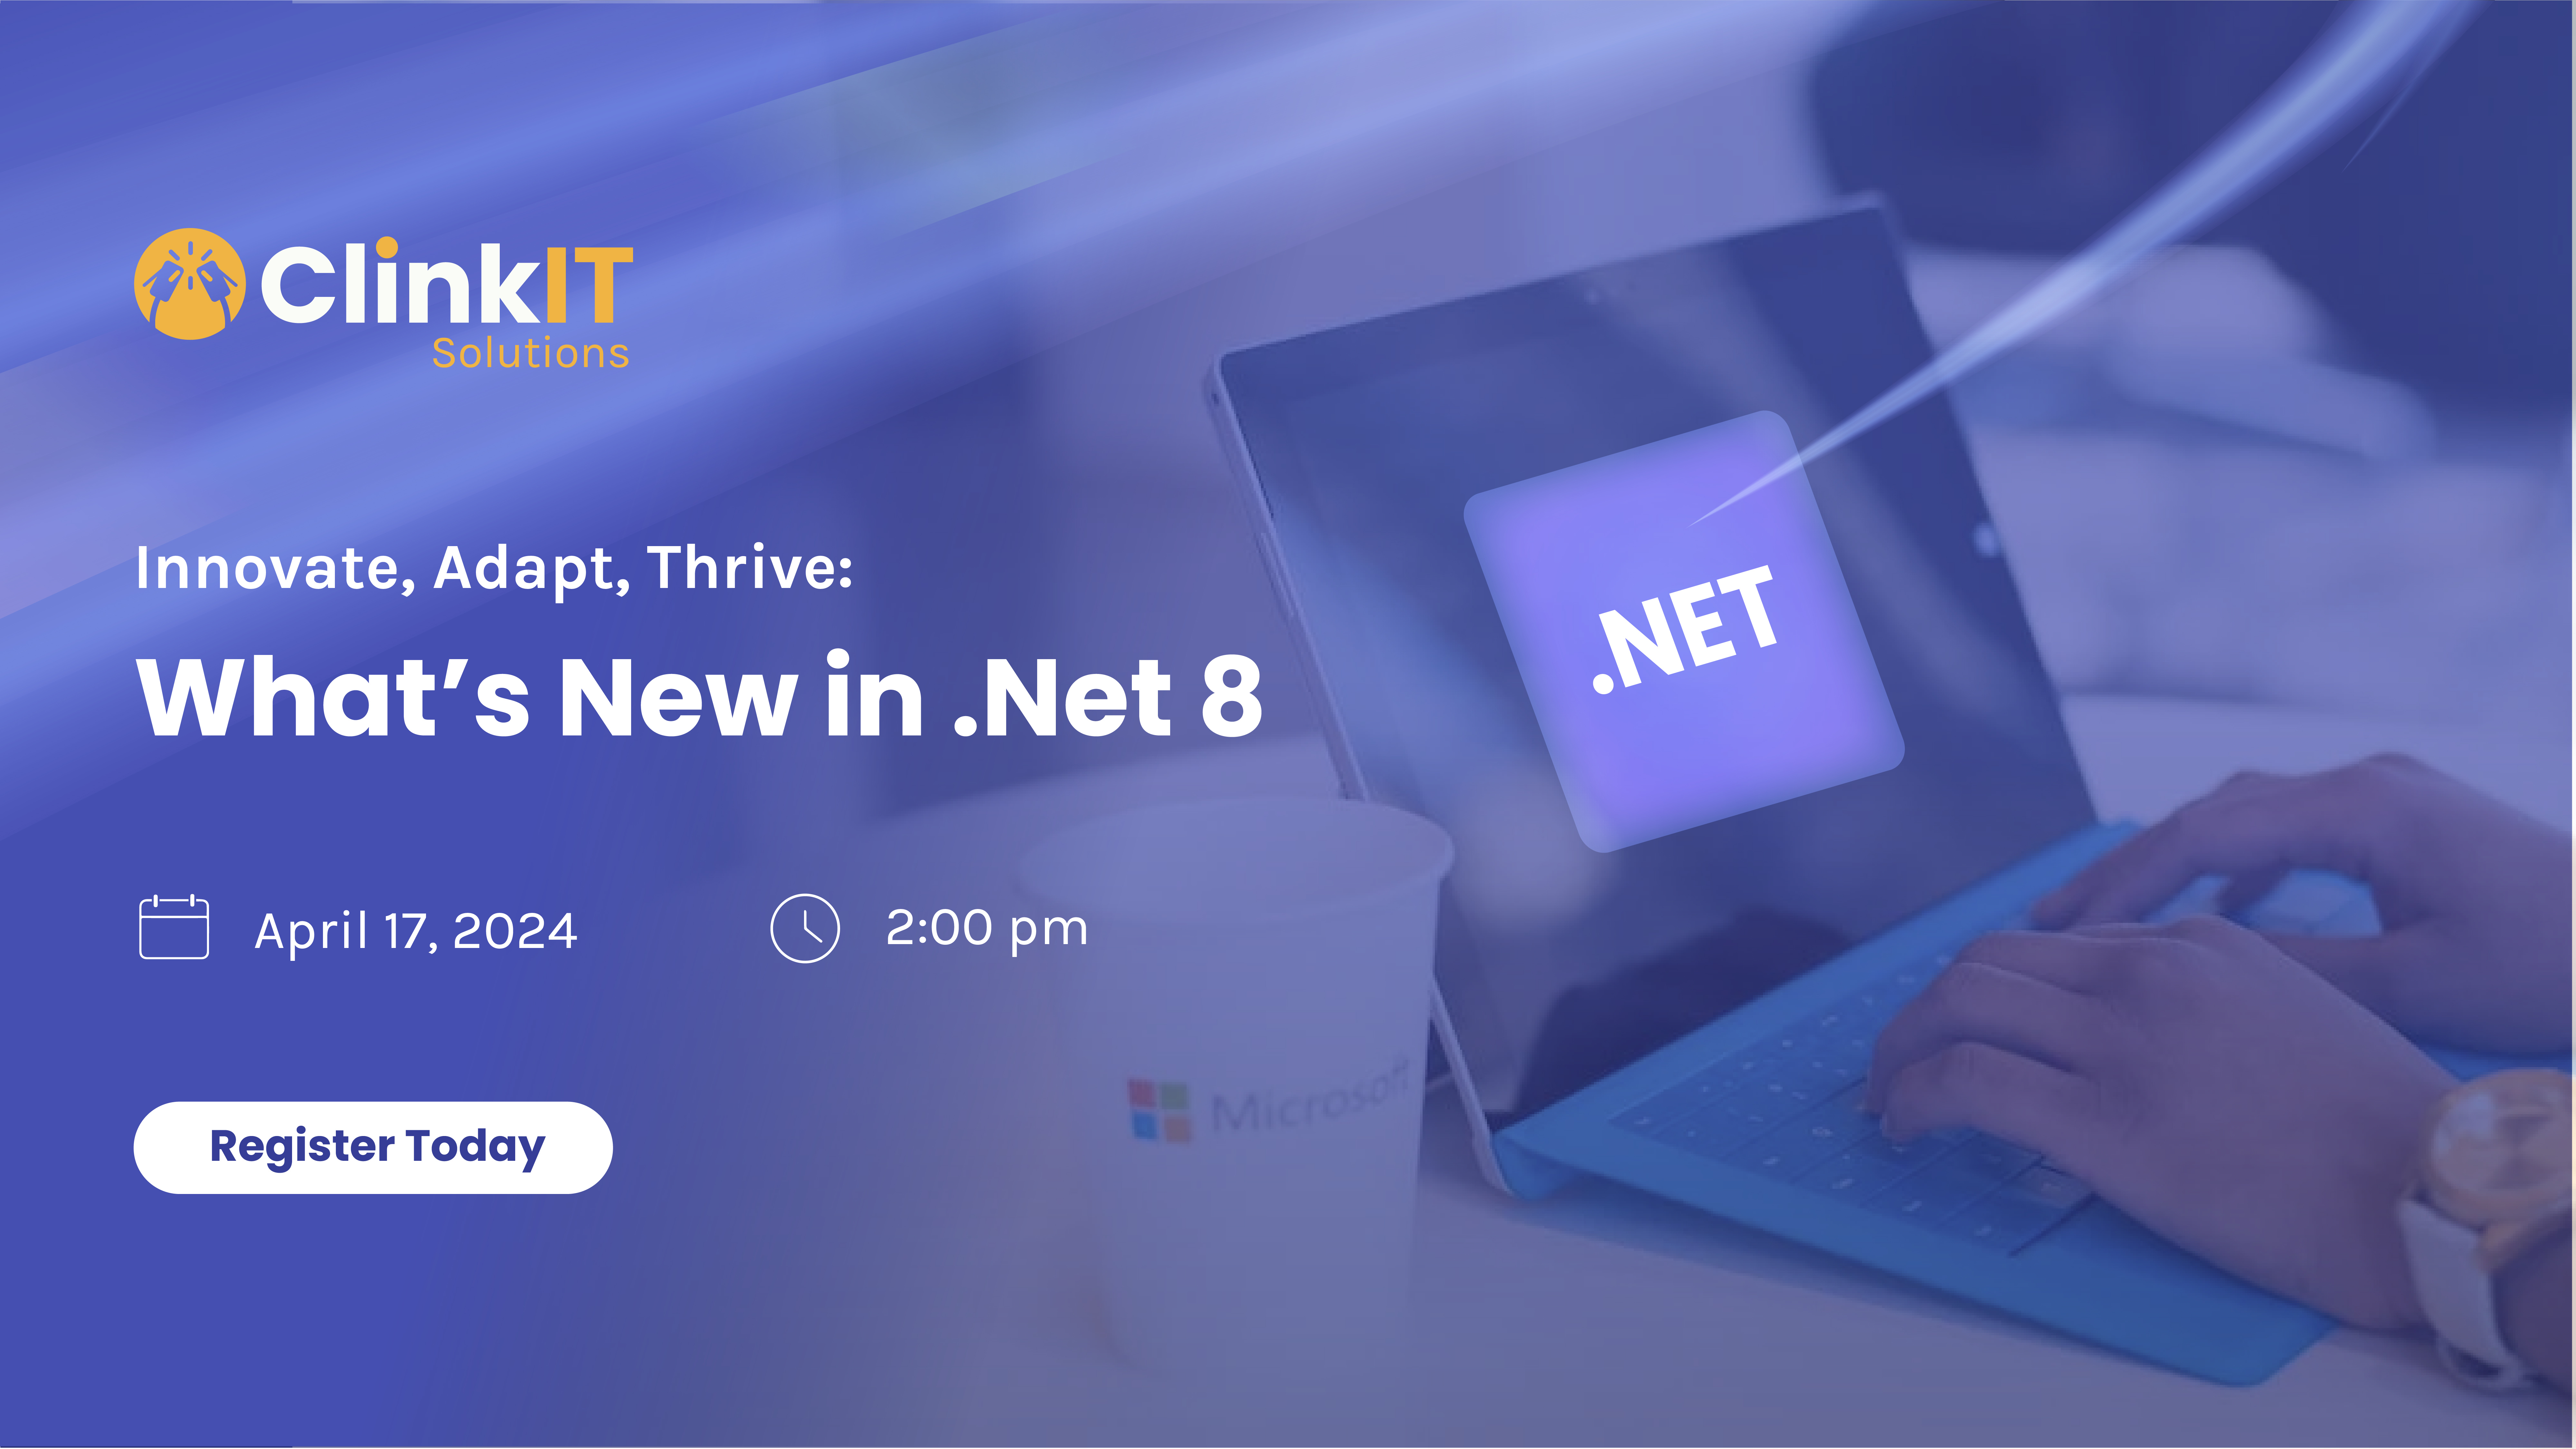 https://www.clinkitsolutions.com/event/innovate-adapt-thrive-whats-new-in-net-8/ 